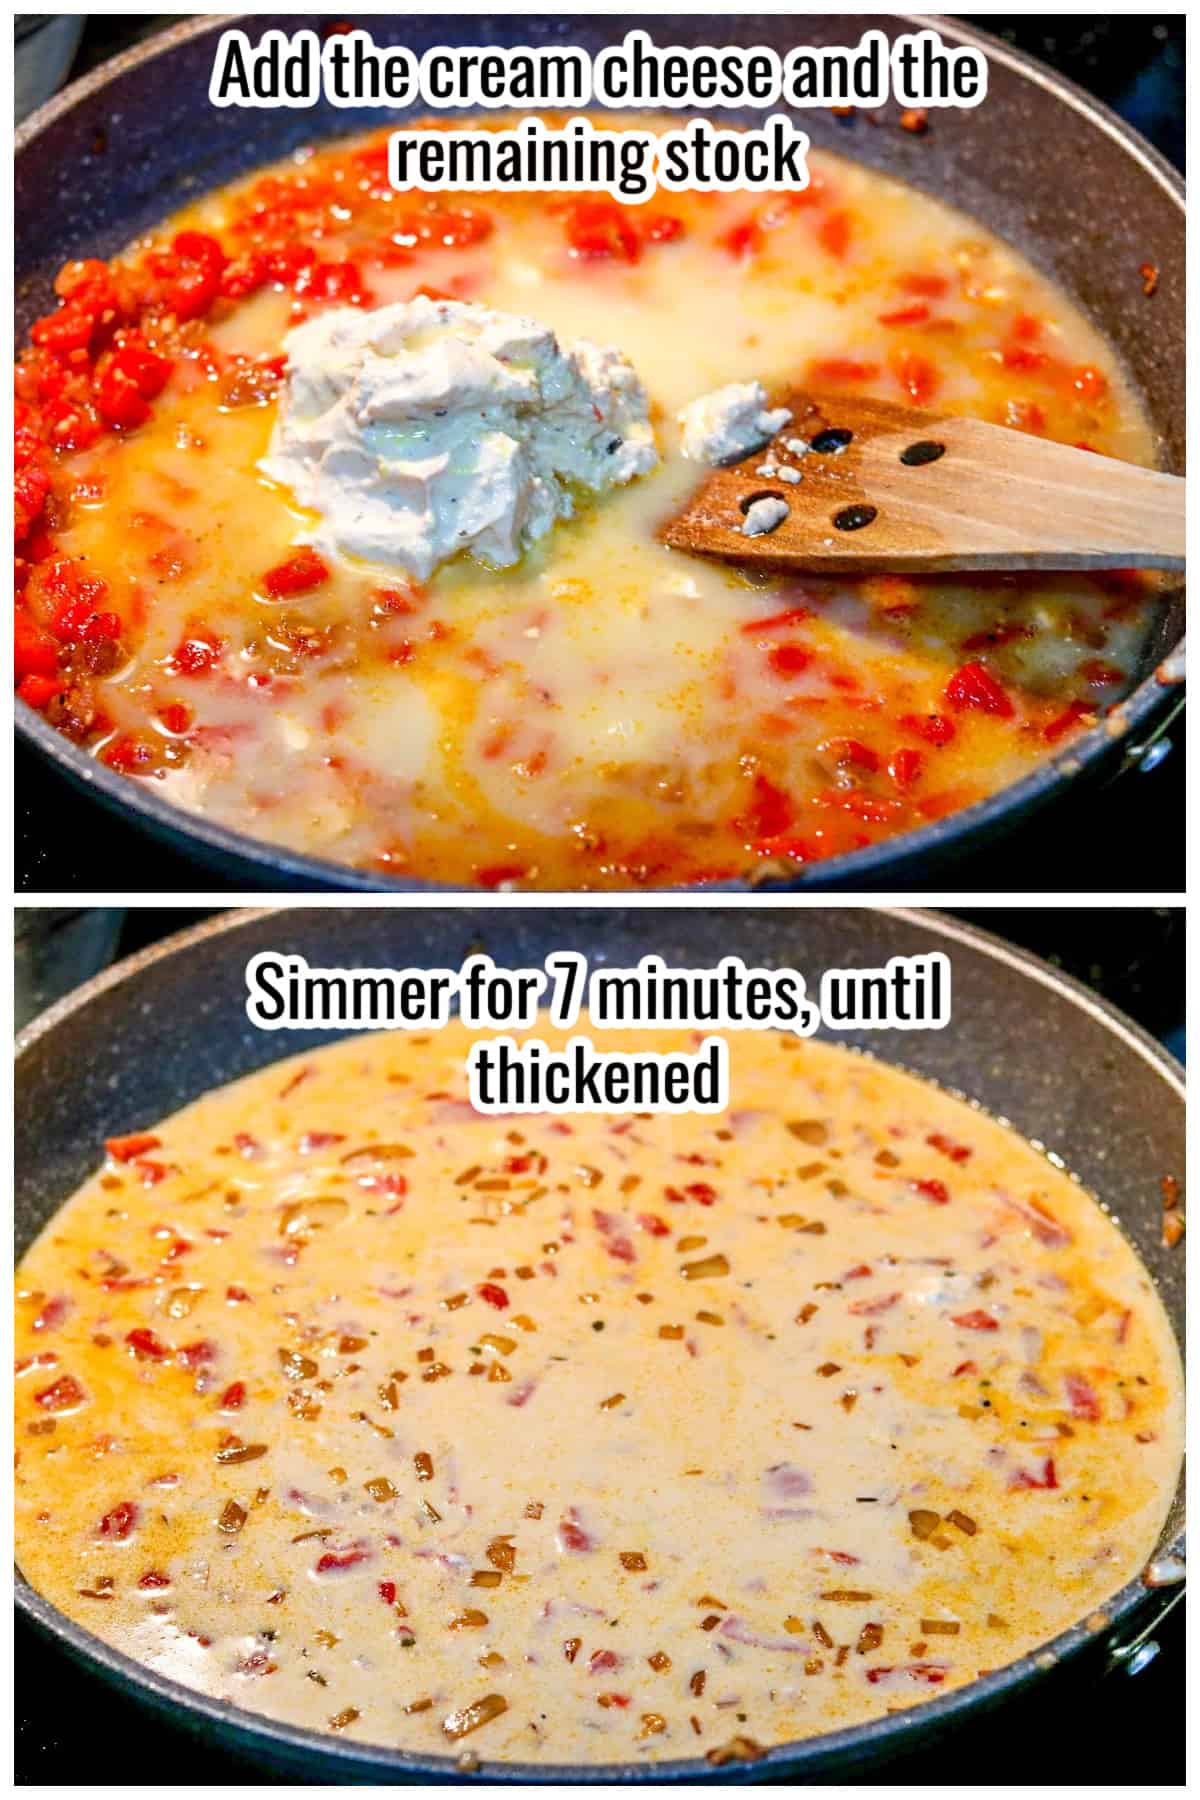 process shots showing adding cream cheese and stock to a sauce.